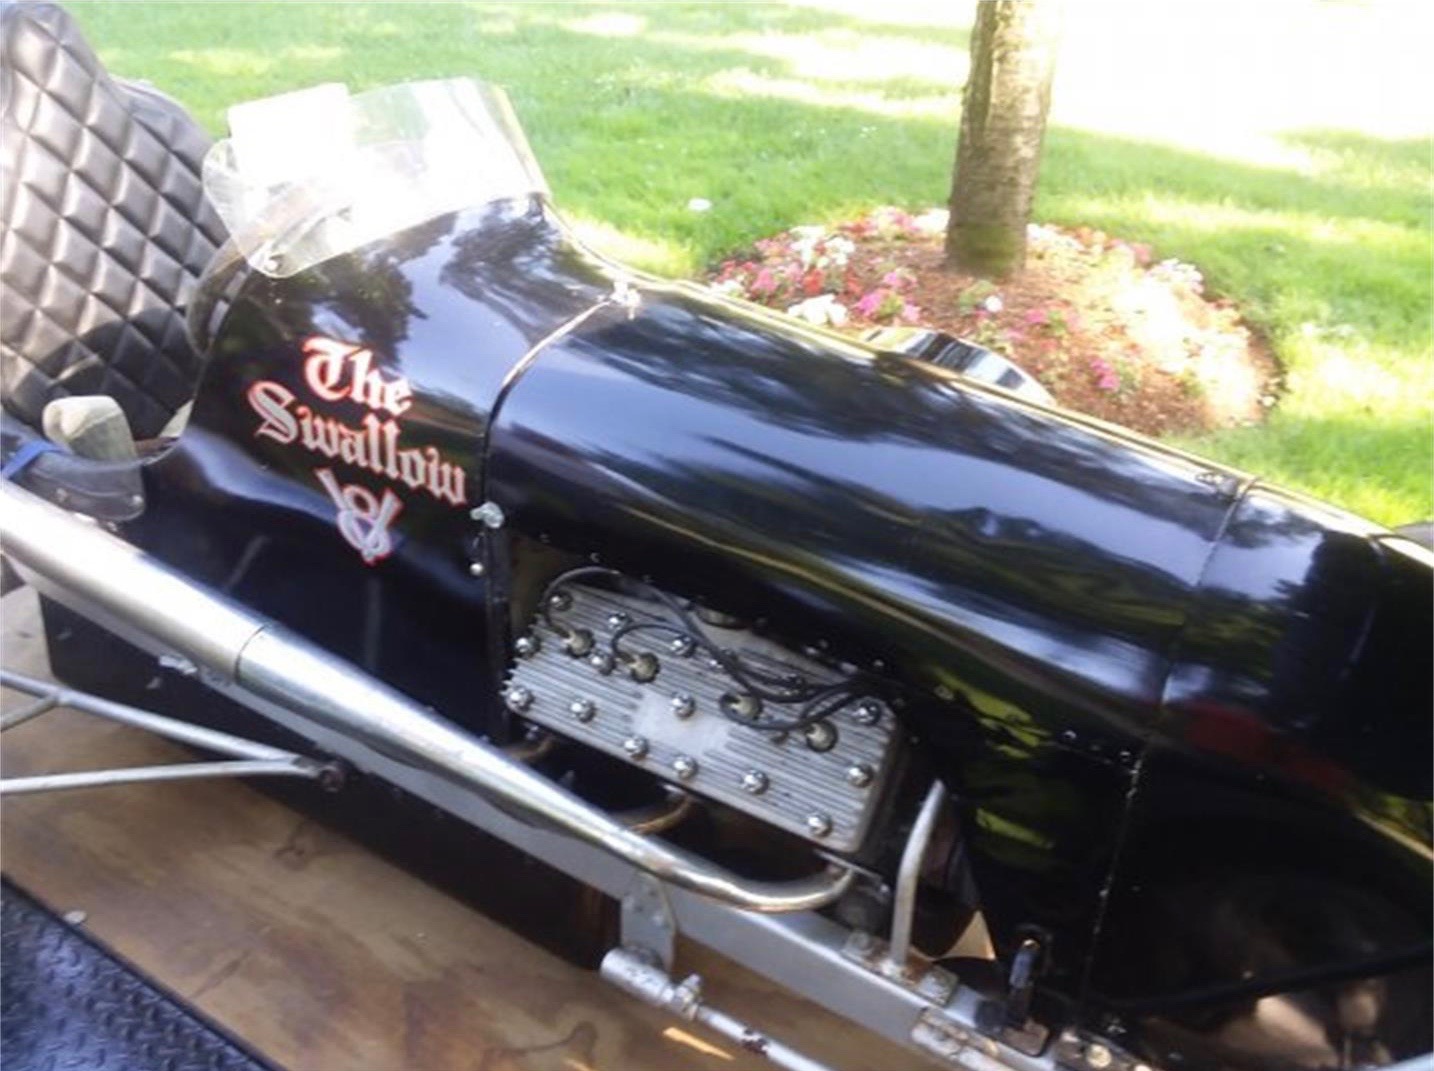 Midget racer, More than 70 years later, this midget-style racer awaits its first race, ClassicCars.com Journal